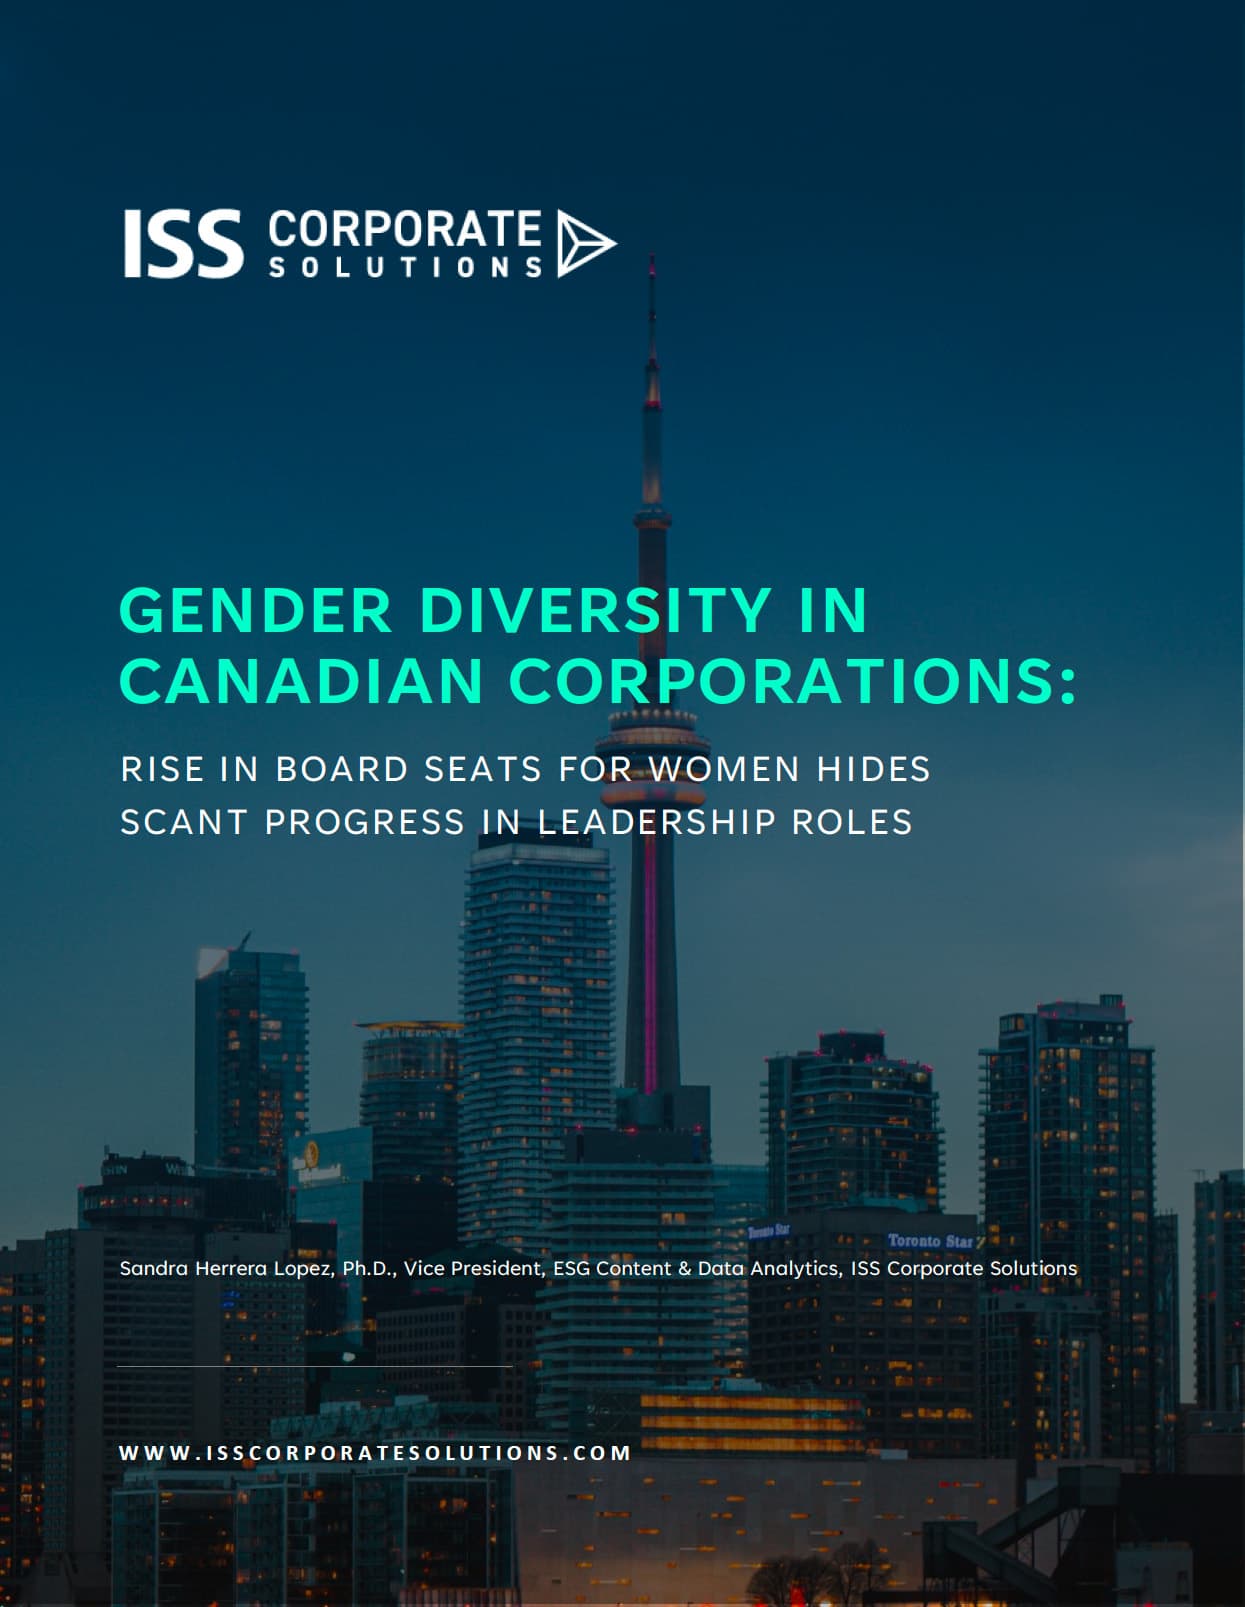 Gender Diversity in Canadian Corporations: Rise in Board Seats for Women Hides Scant Progress in Leadership Roles